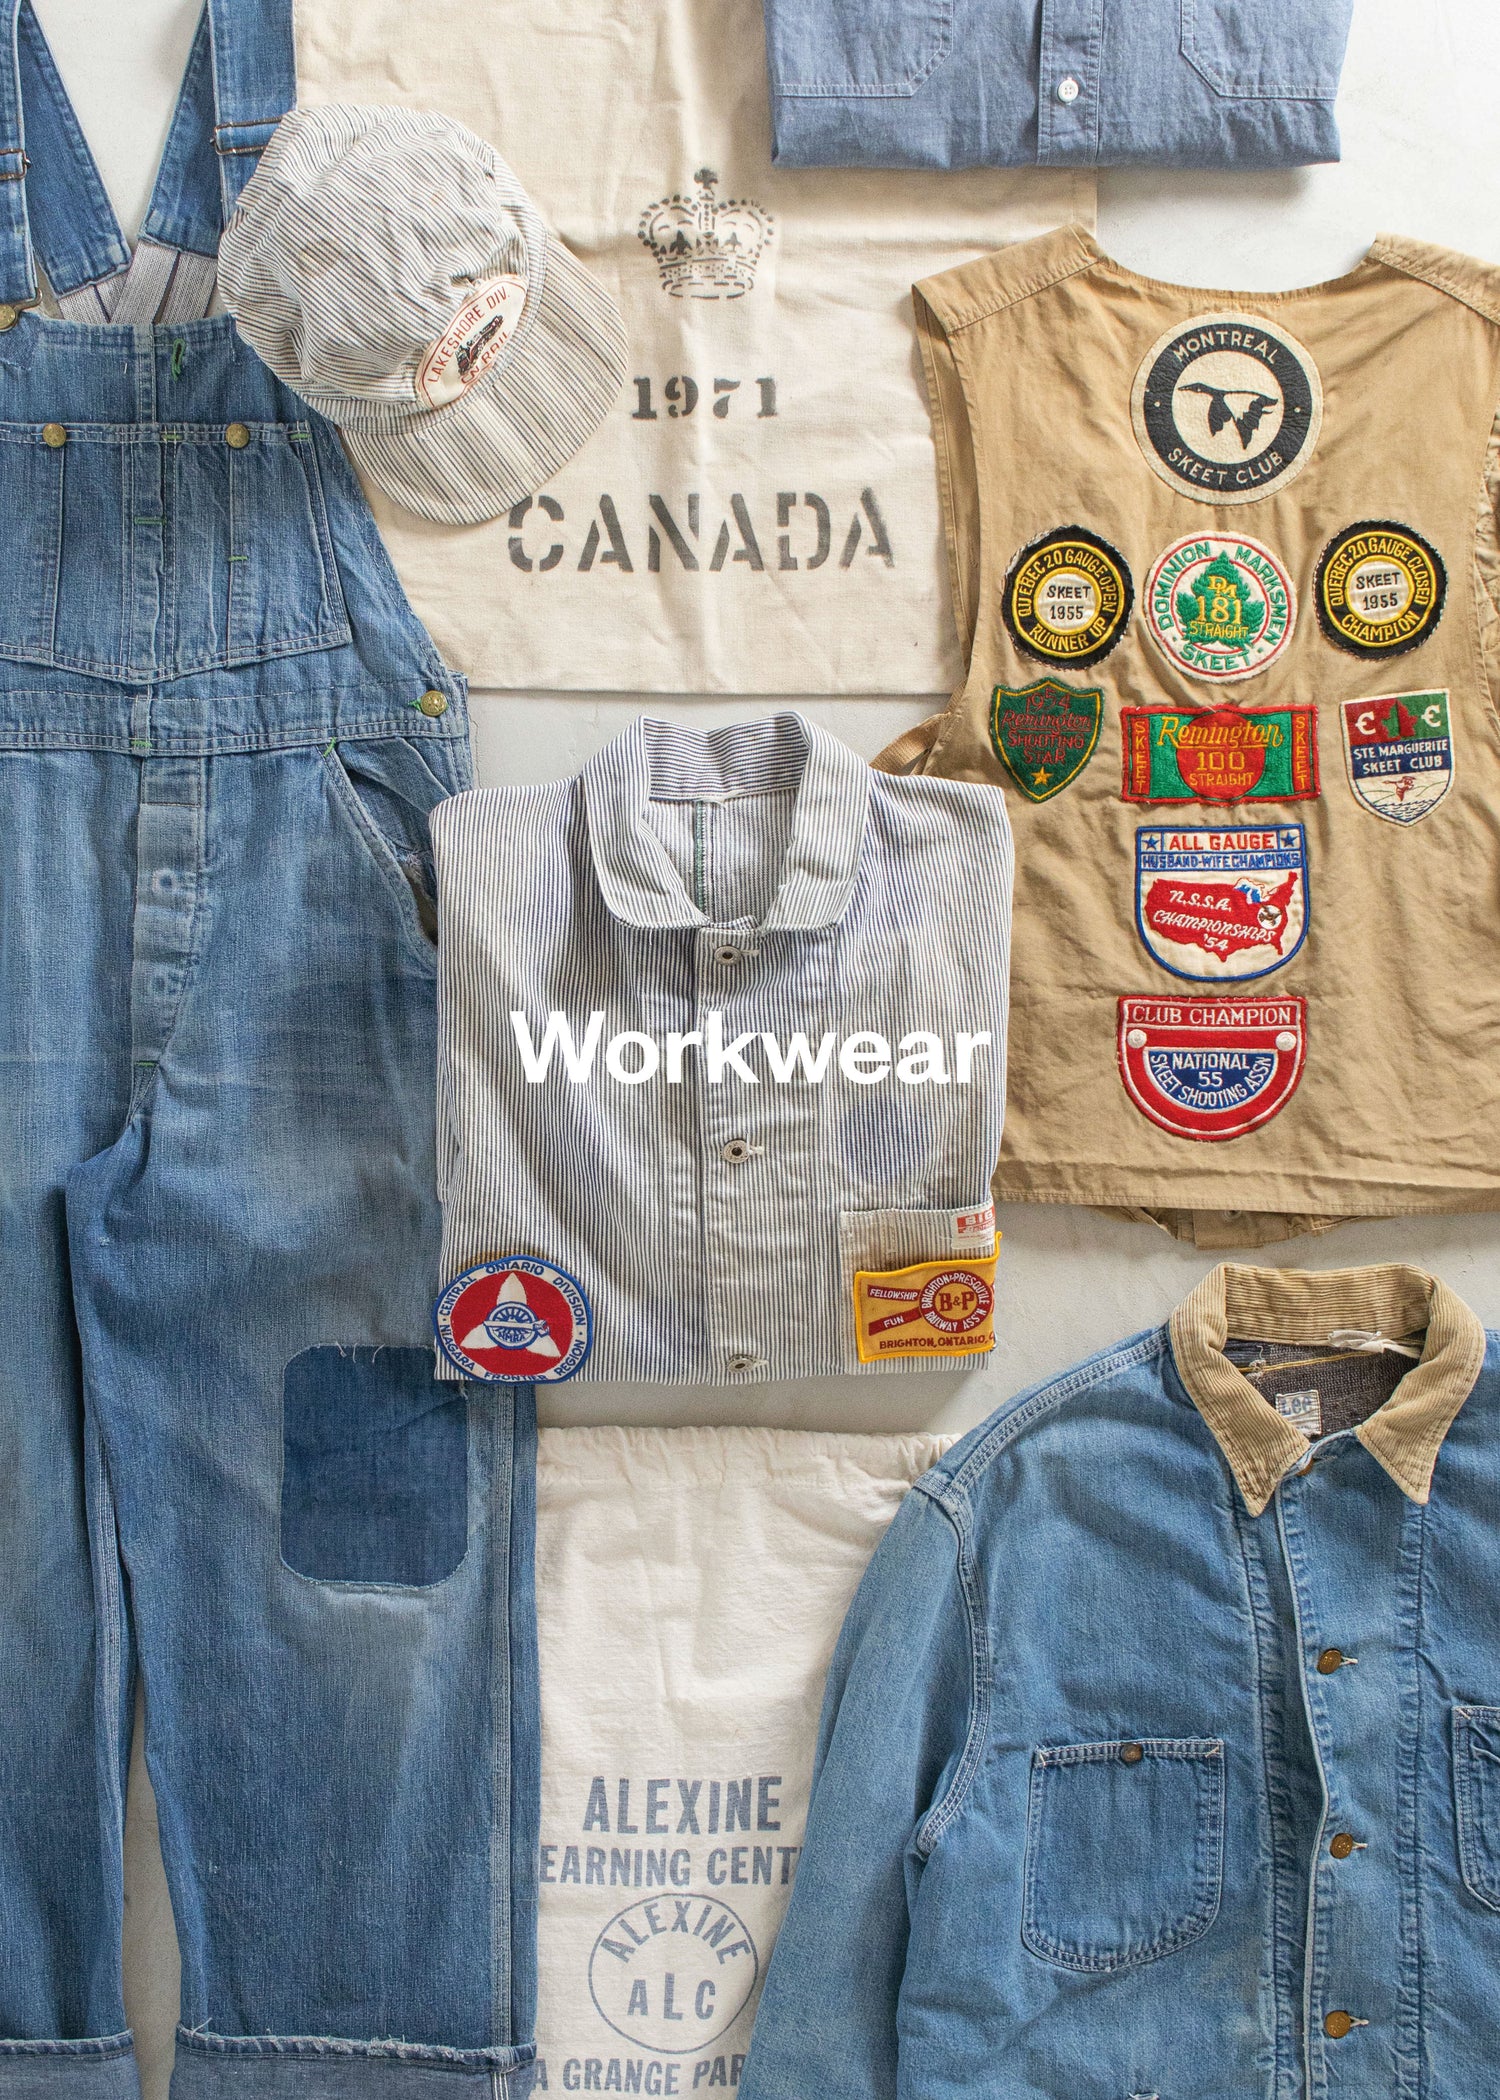 Workwear Collection